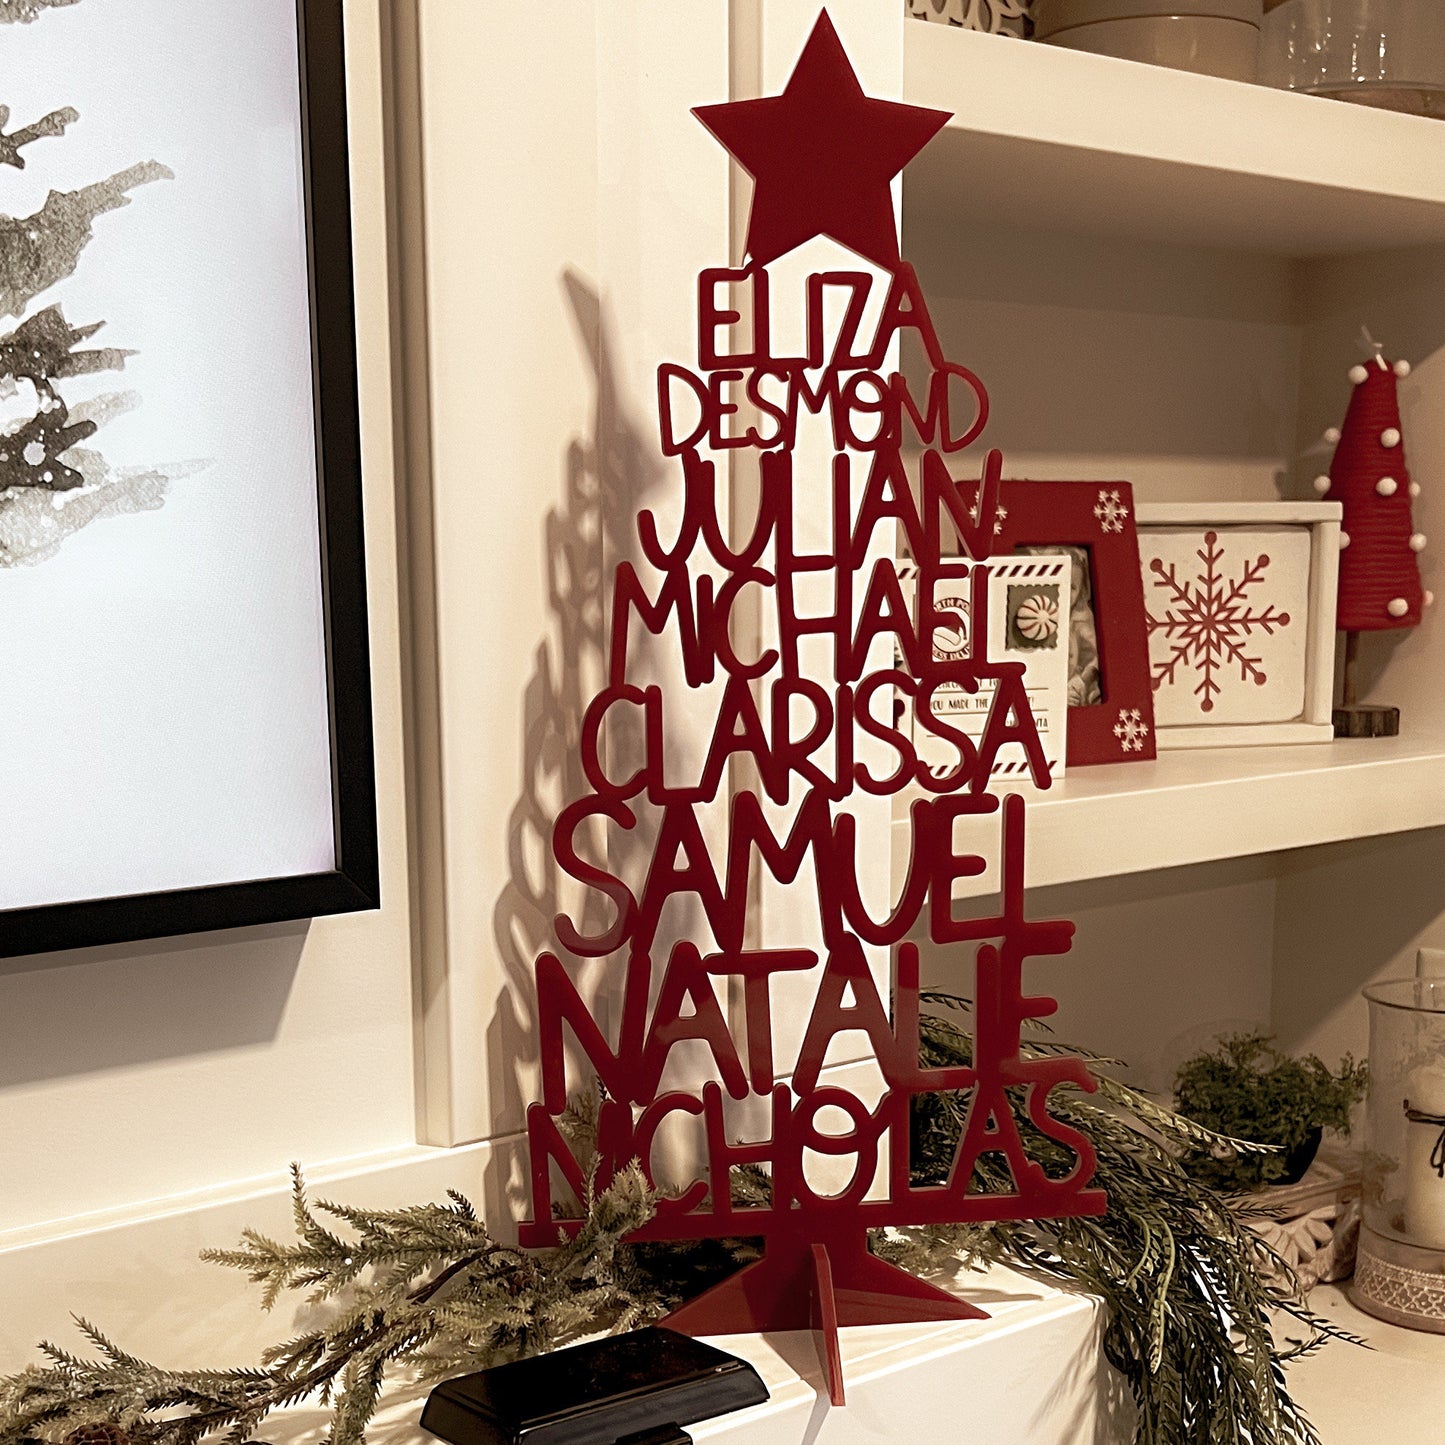 Your People Holiday Acrylic/Wood Tree Personalized with Names, Family & Kids Names Tree, Gift for Mom, Dad, Grandma, Grandpa [FREE SHIPPING]